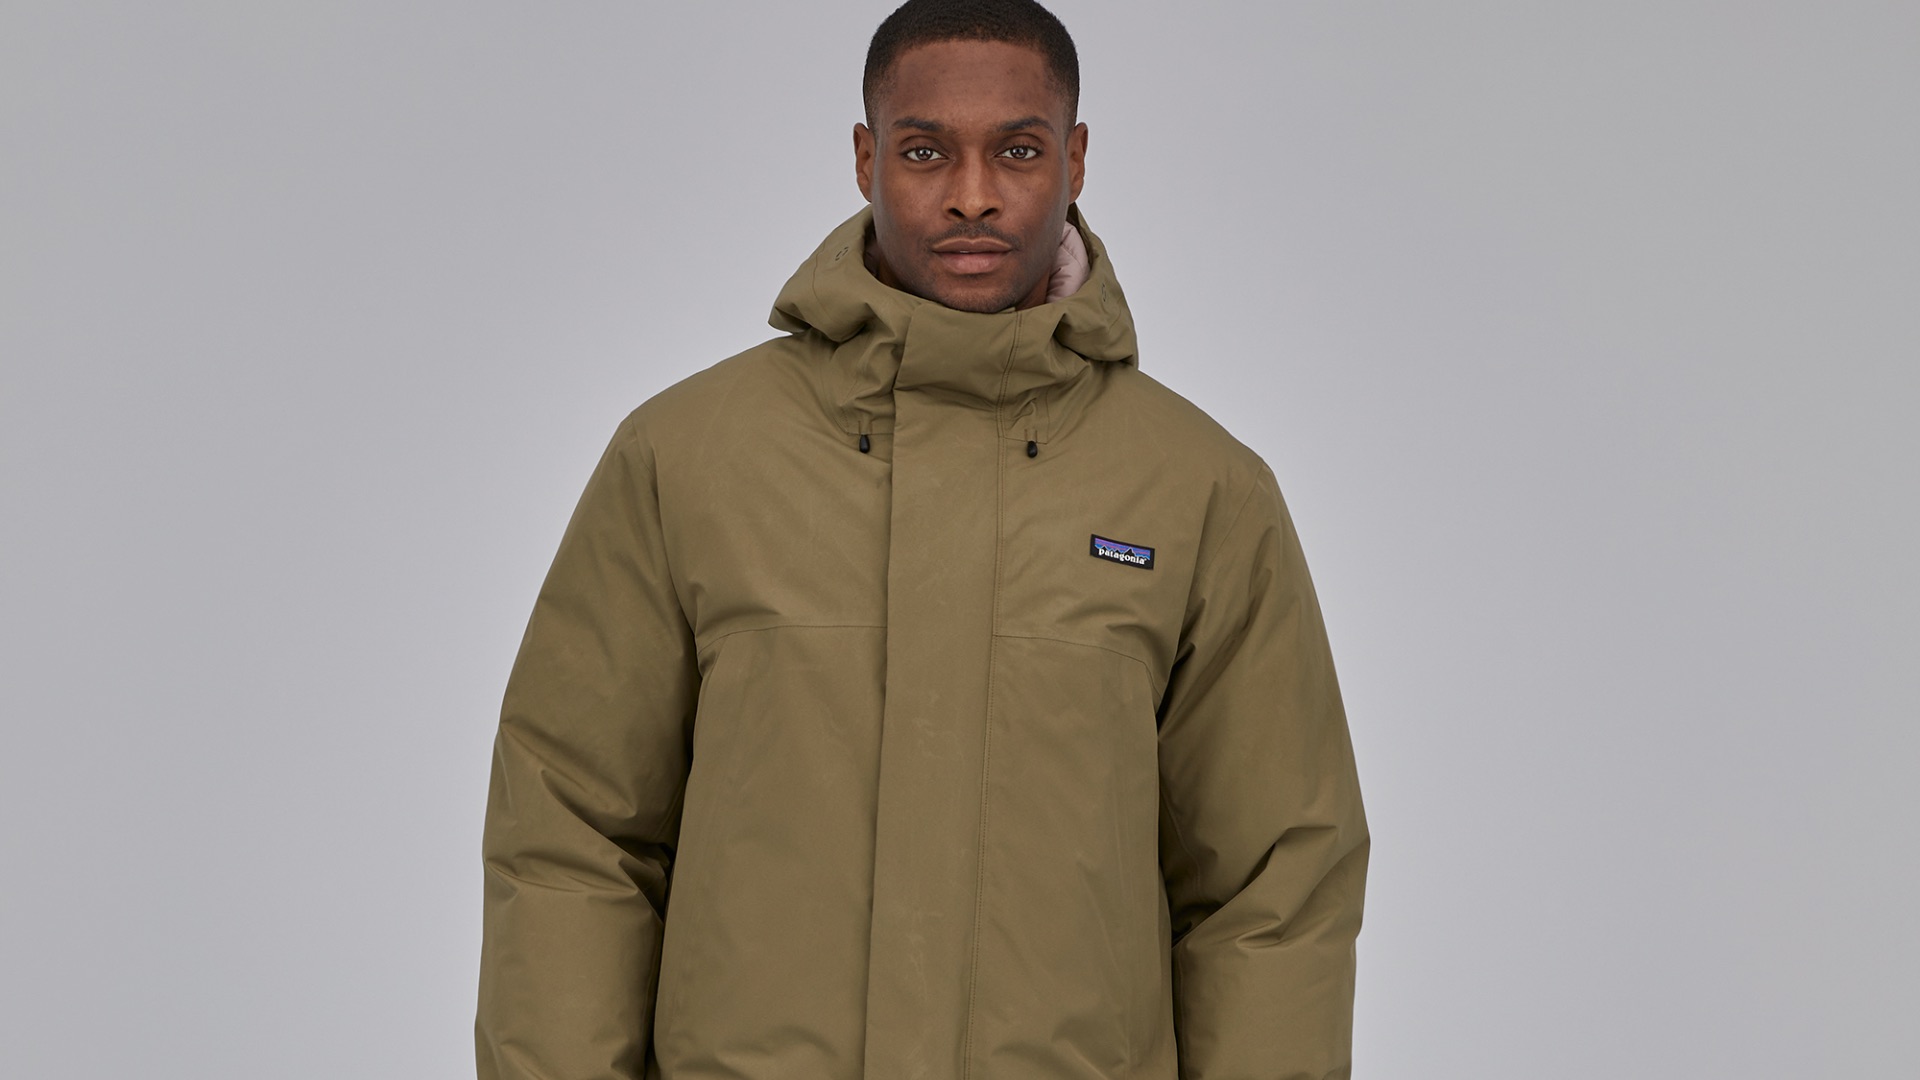 This new Patagonia jacket is the first GORE-TEX jacket to feature